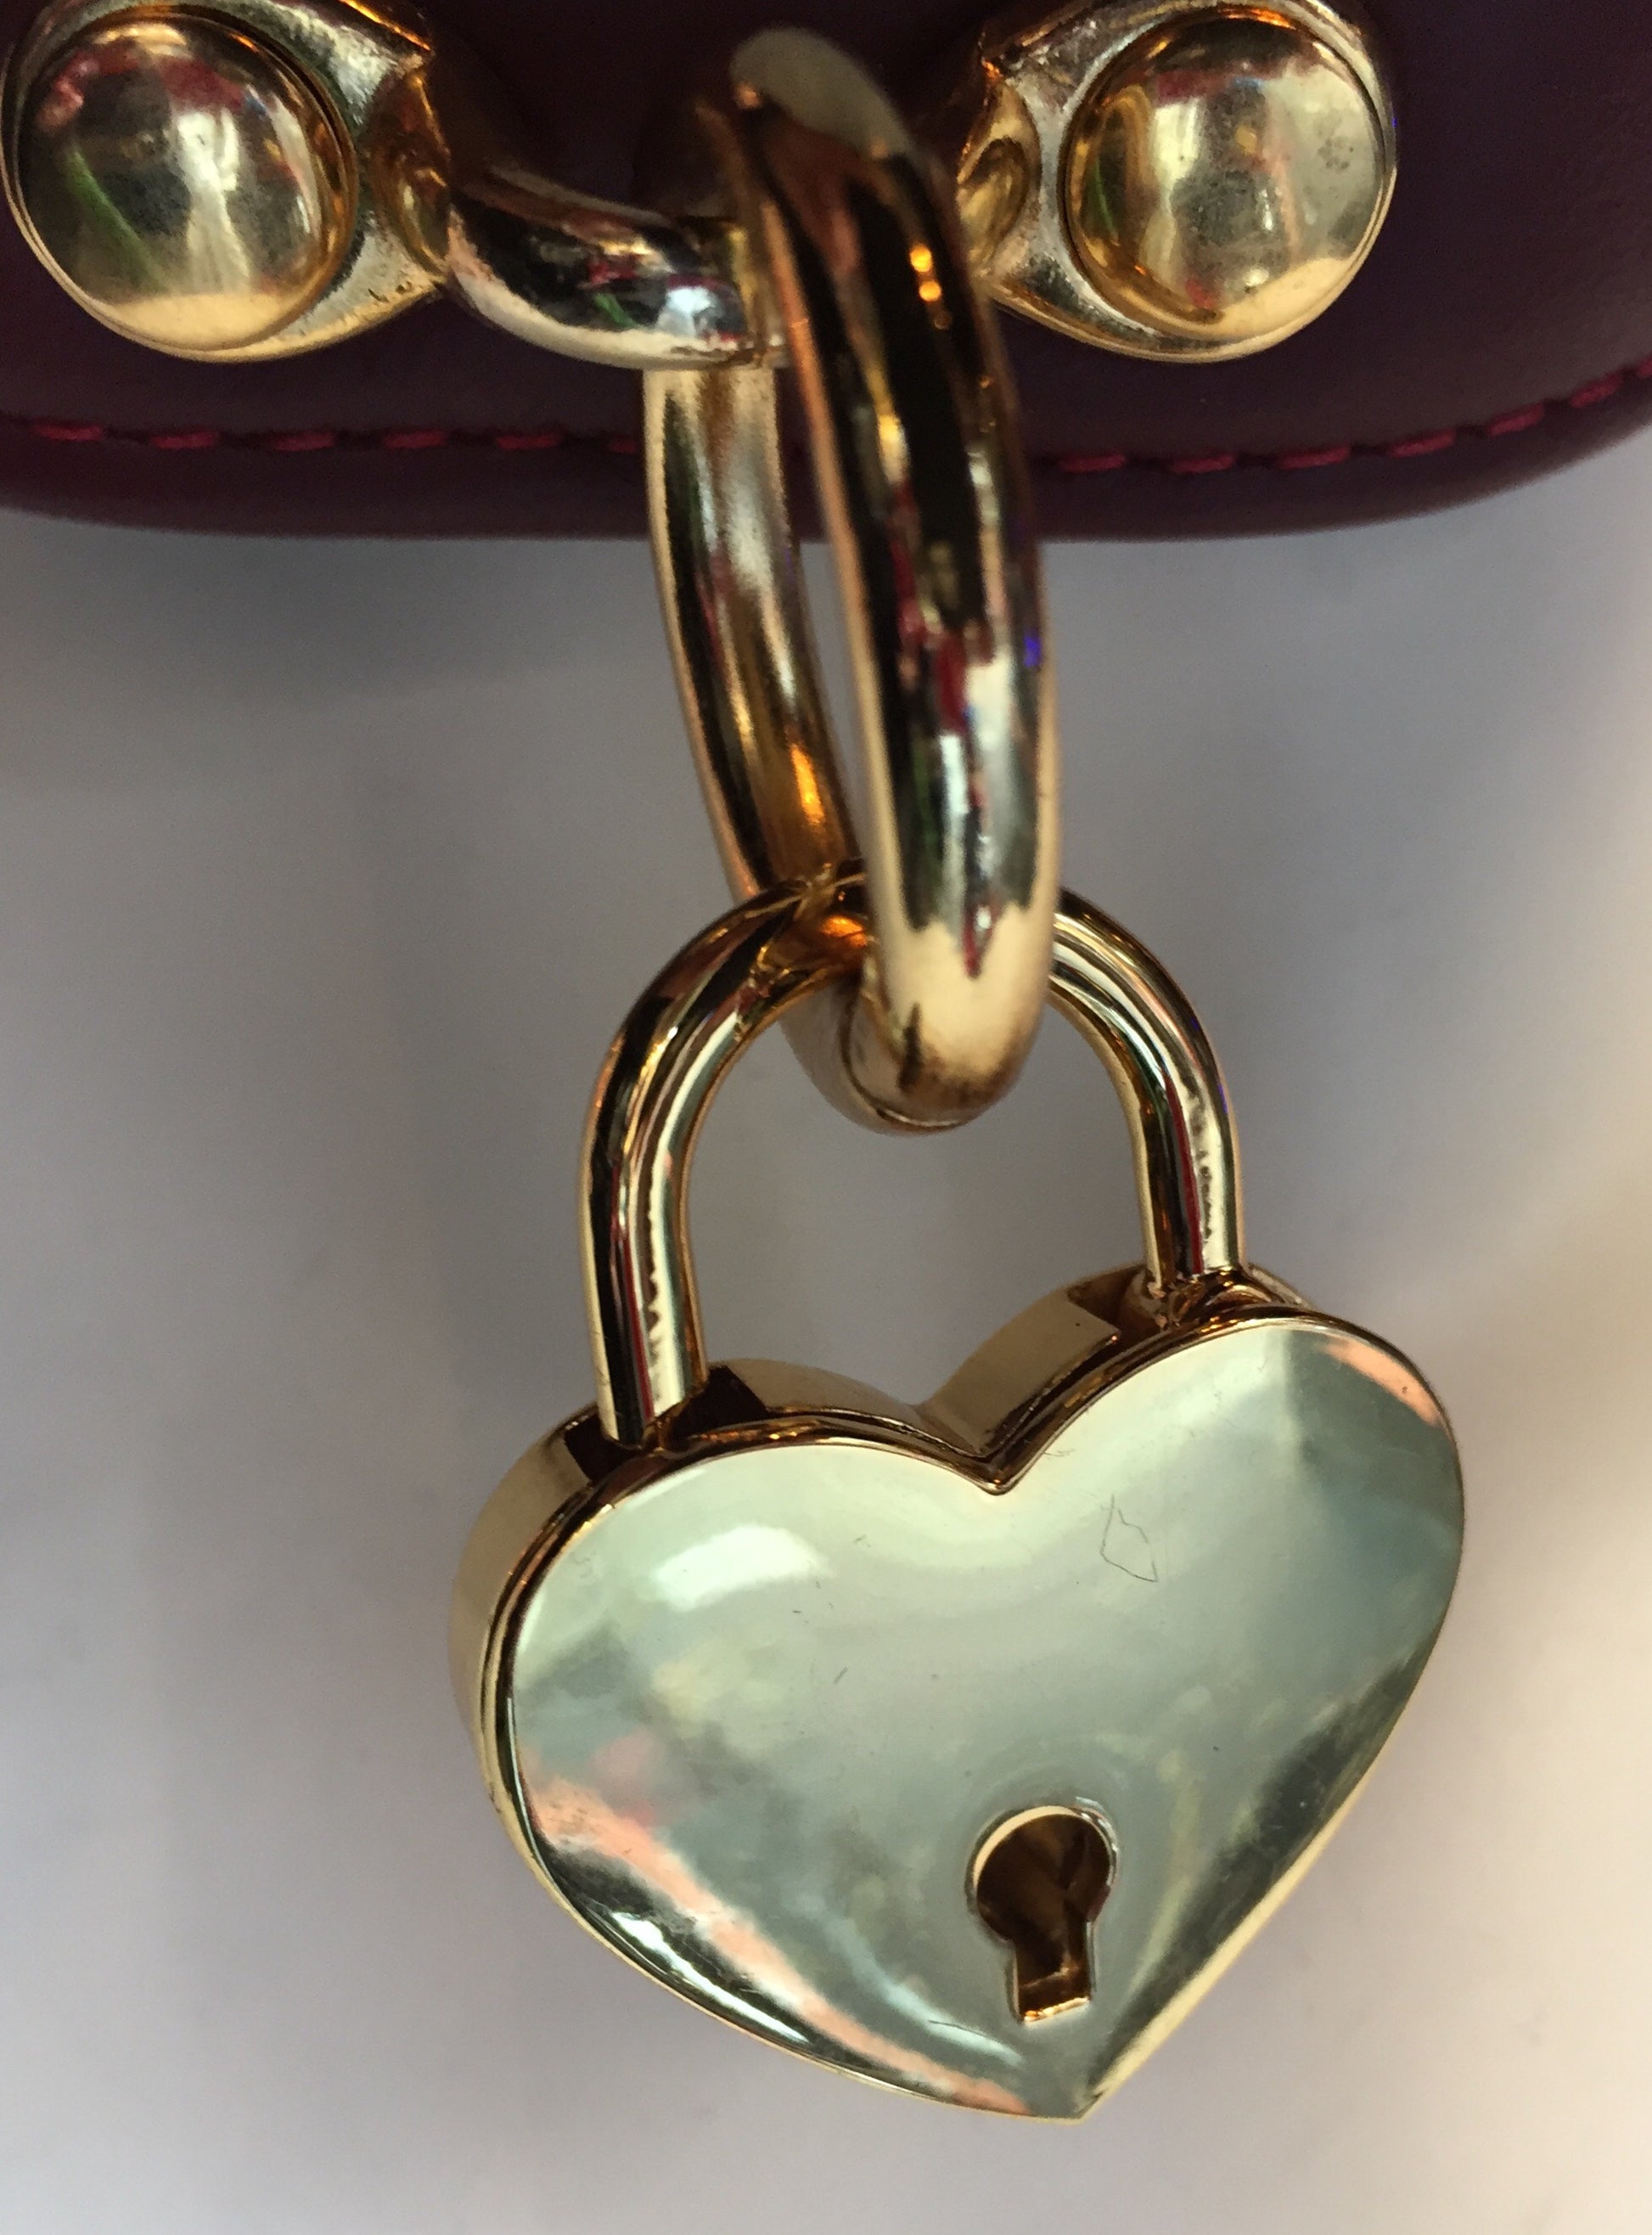 Gold large heart lock locked onto O-ring of a leather collar.